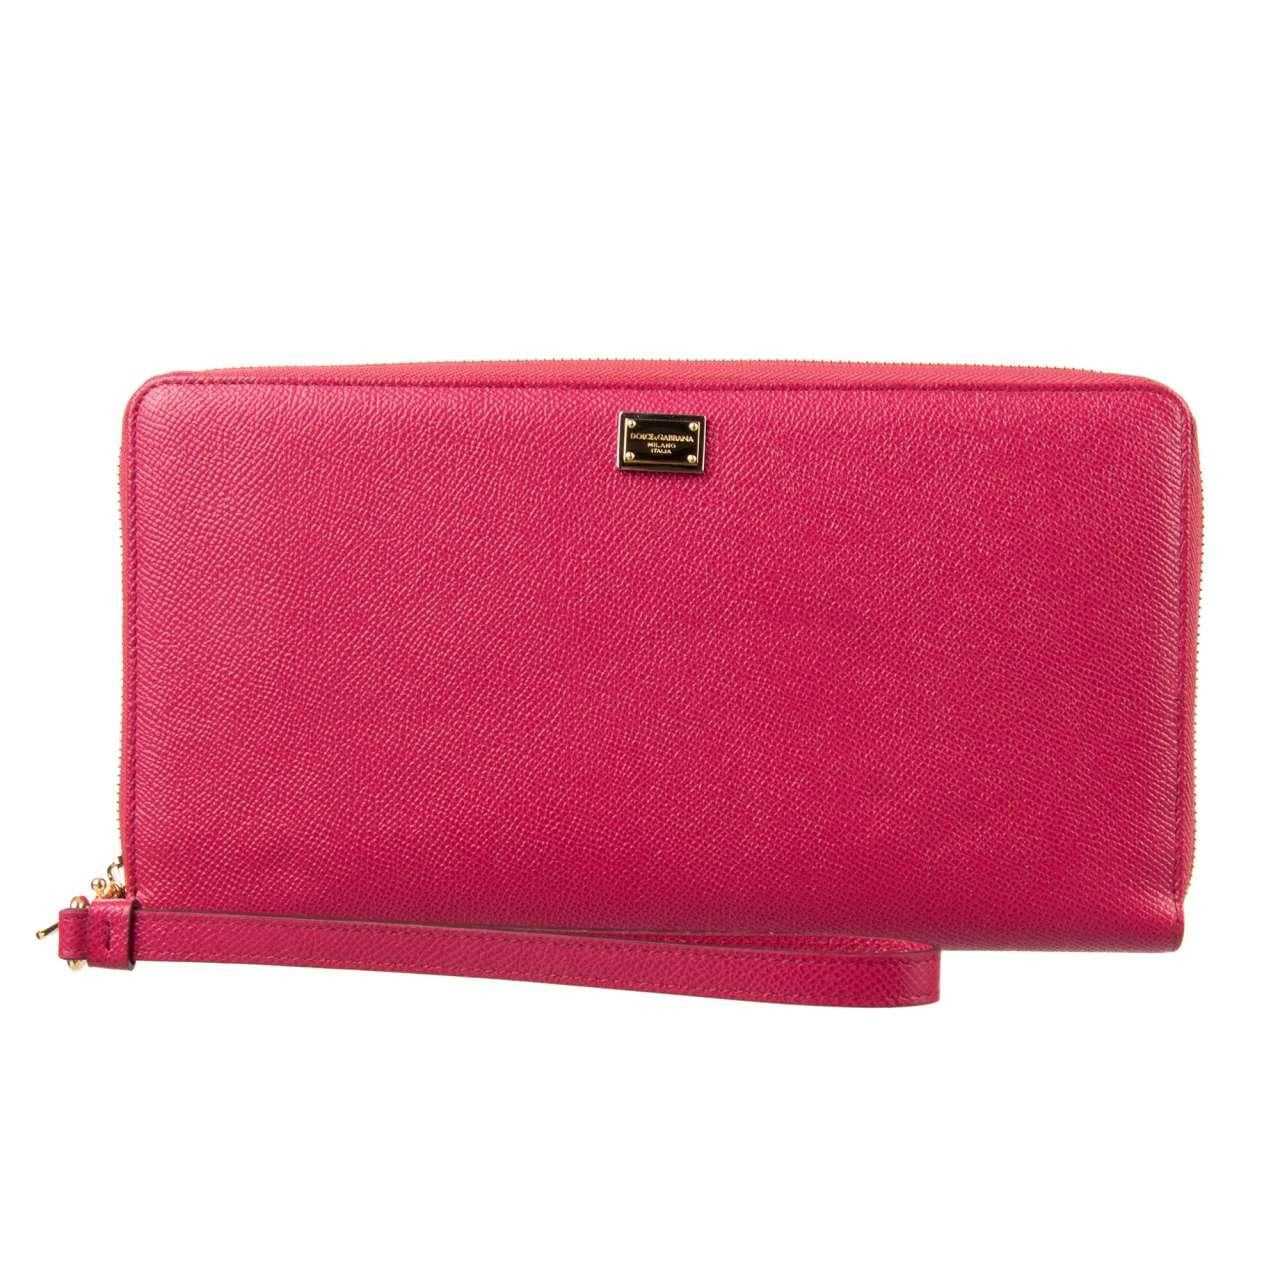 Dolce & Gabbana - Dauphine Leather Clutch Wallet Bag with Logo Pink For Sale 1